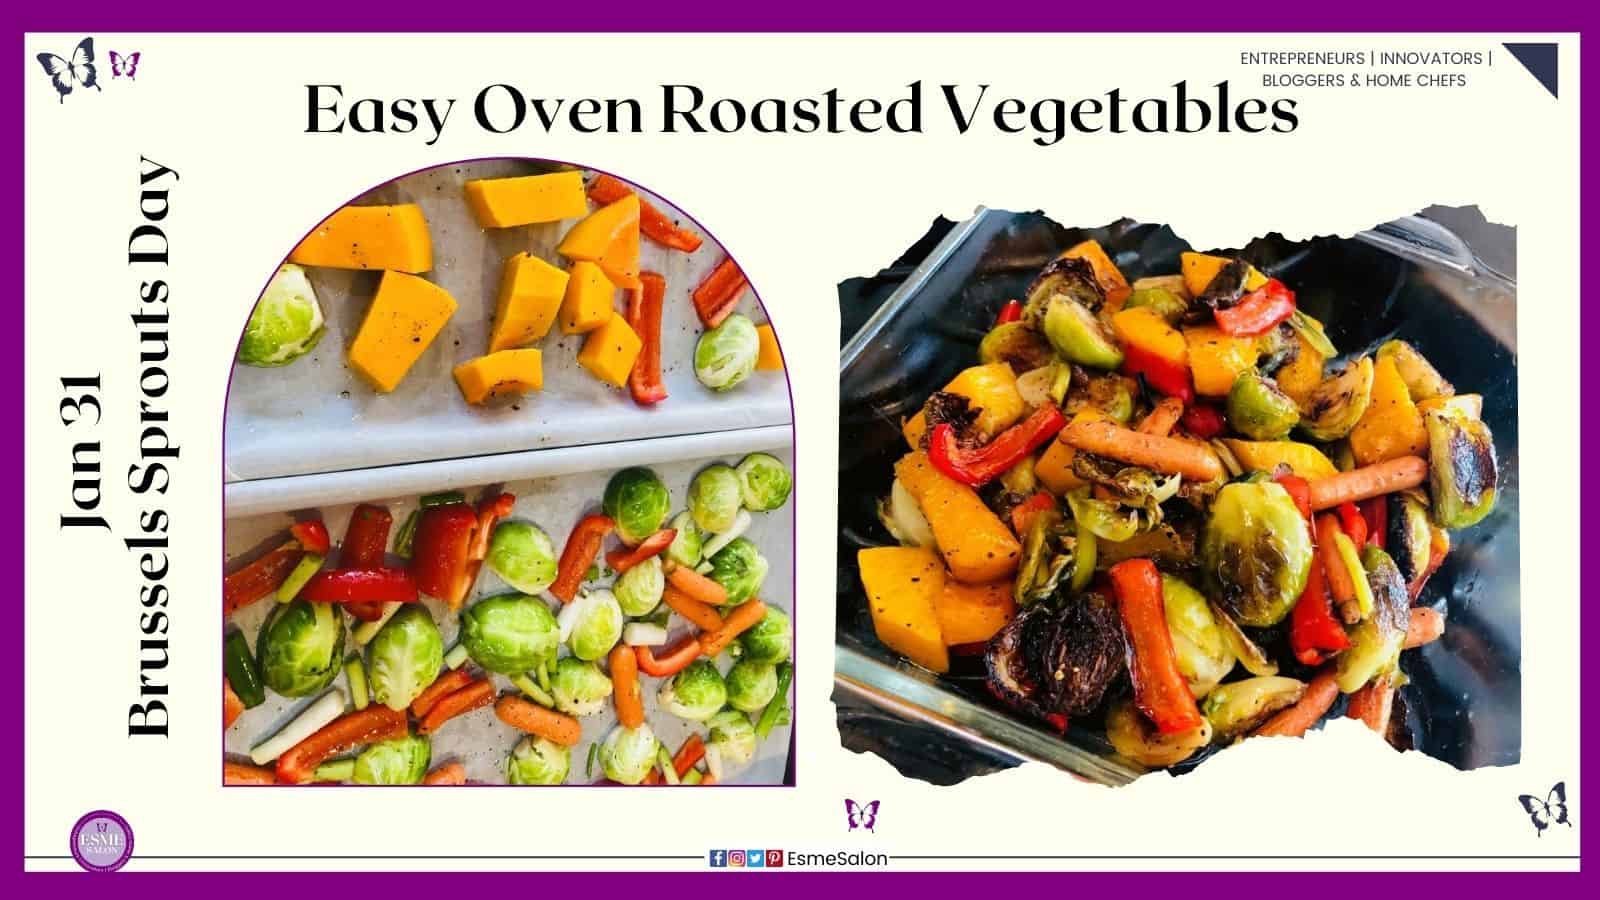 an image of fresh cut veggies for an Easy Oven Roasted Vegetables dish